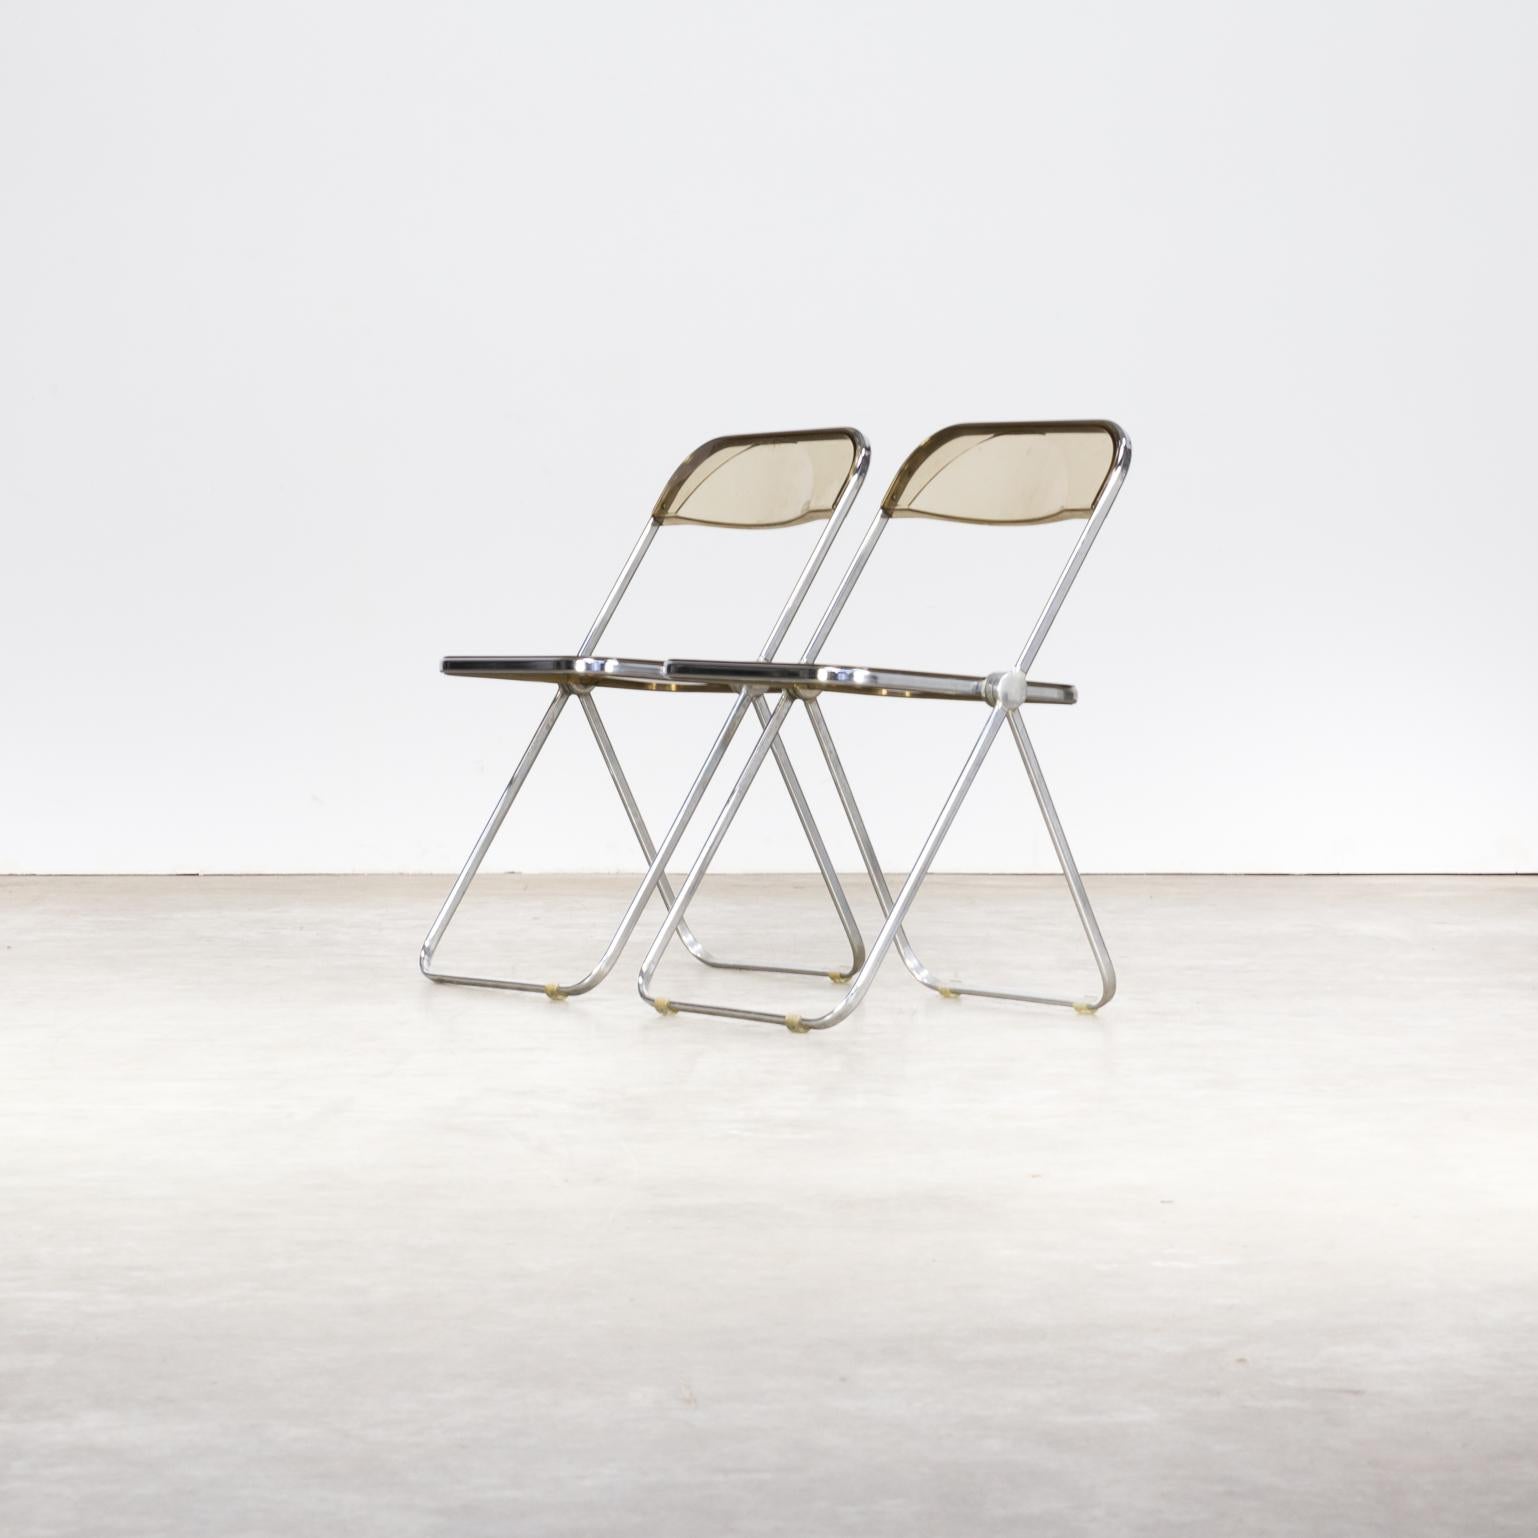 1970s Giancarlo Piretti ‘Plia’ folding chair for Castelli set of 2. Good condition, consistent with age and use.